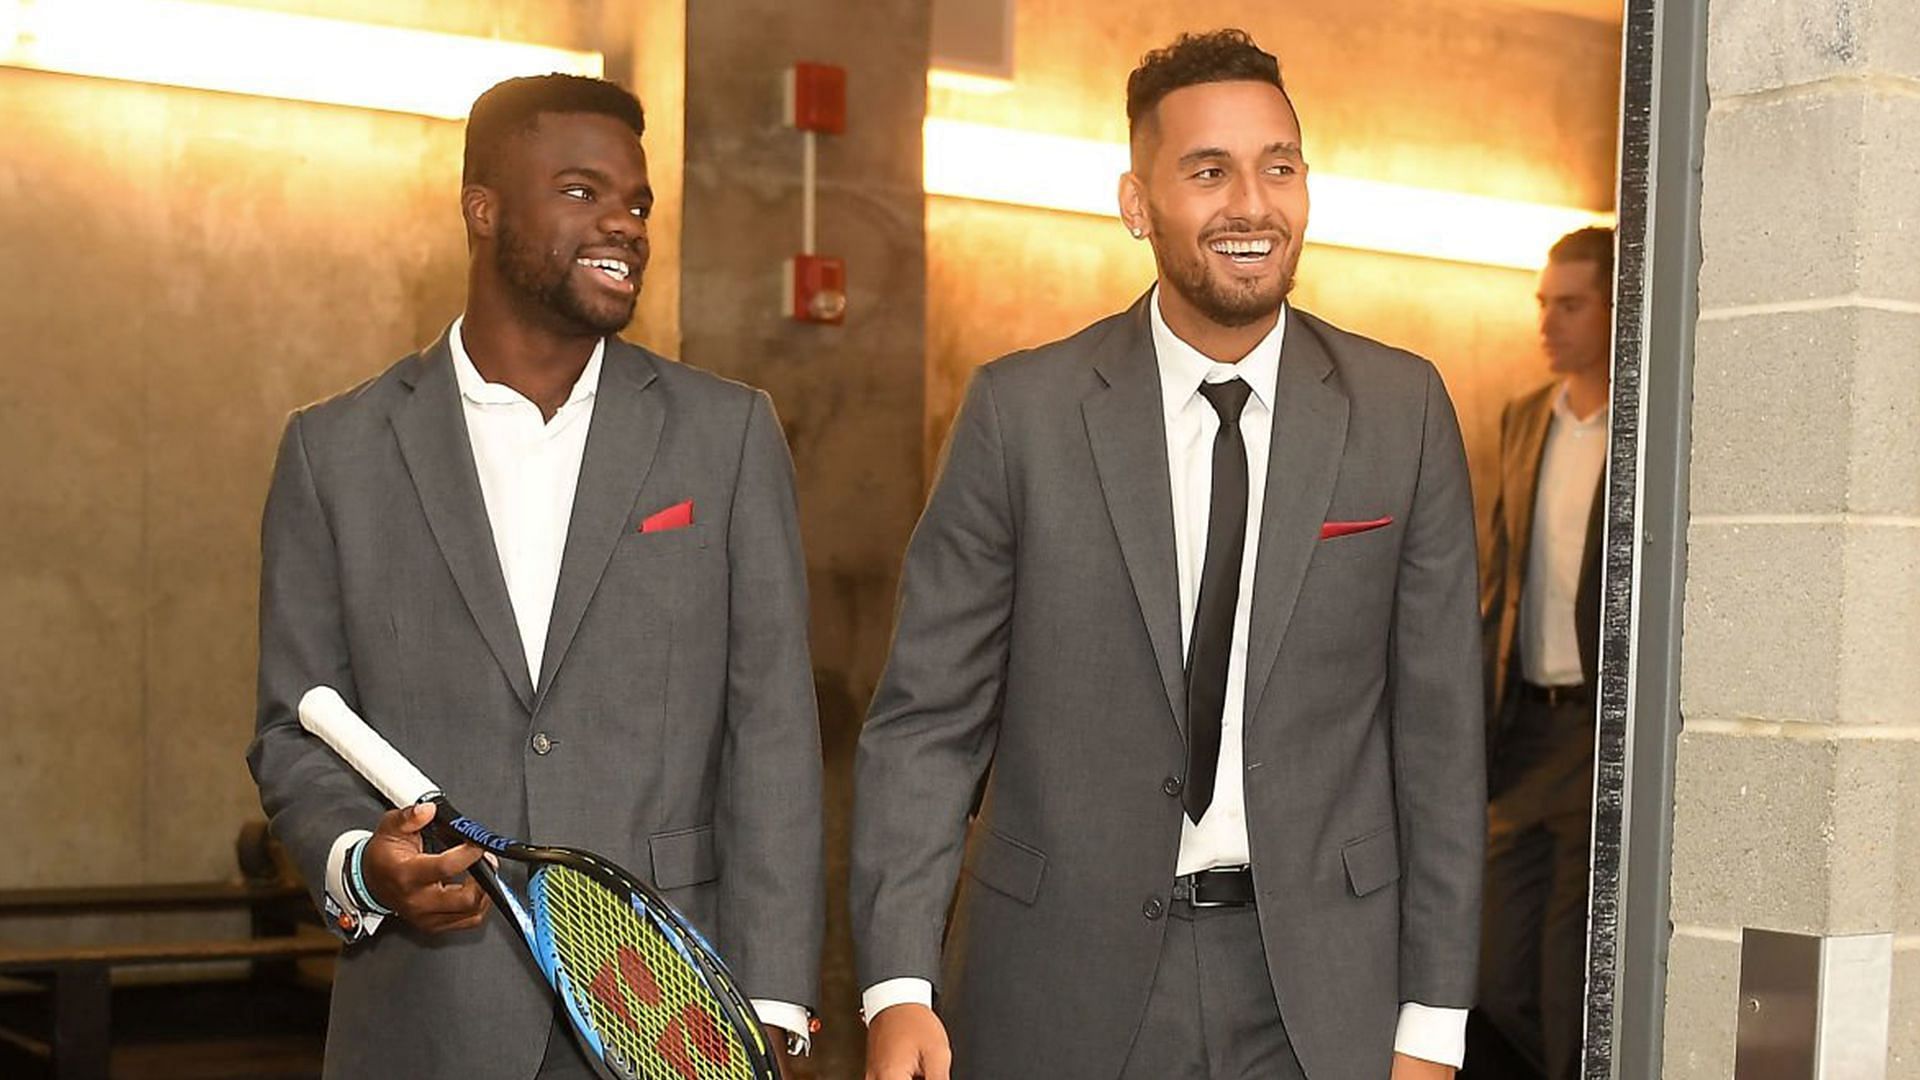 Frances Tiafoe and Nick Kyrgios in Chicago: 2018 Laver Cup